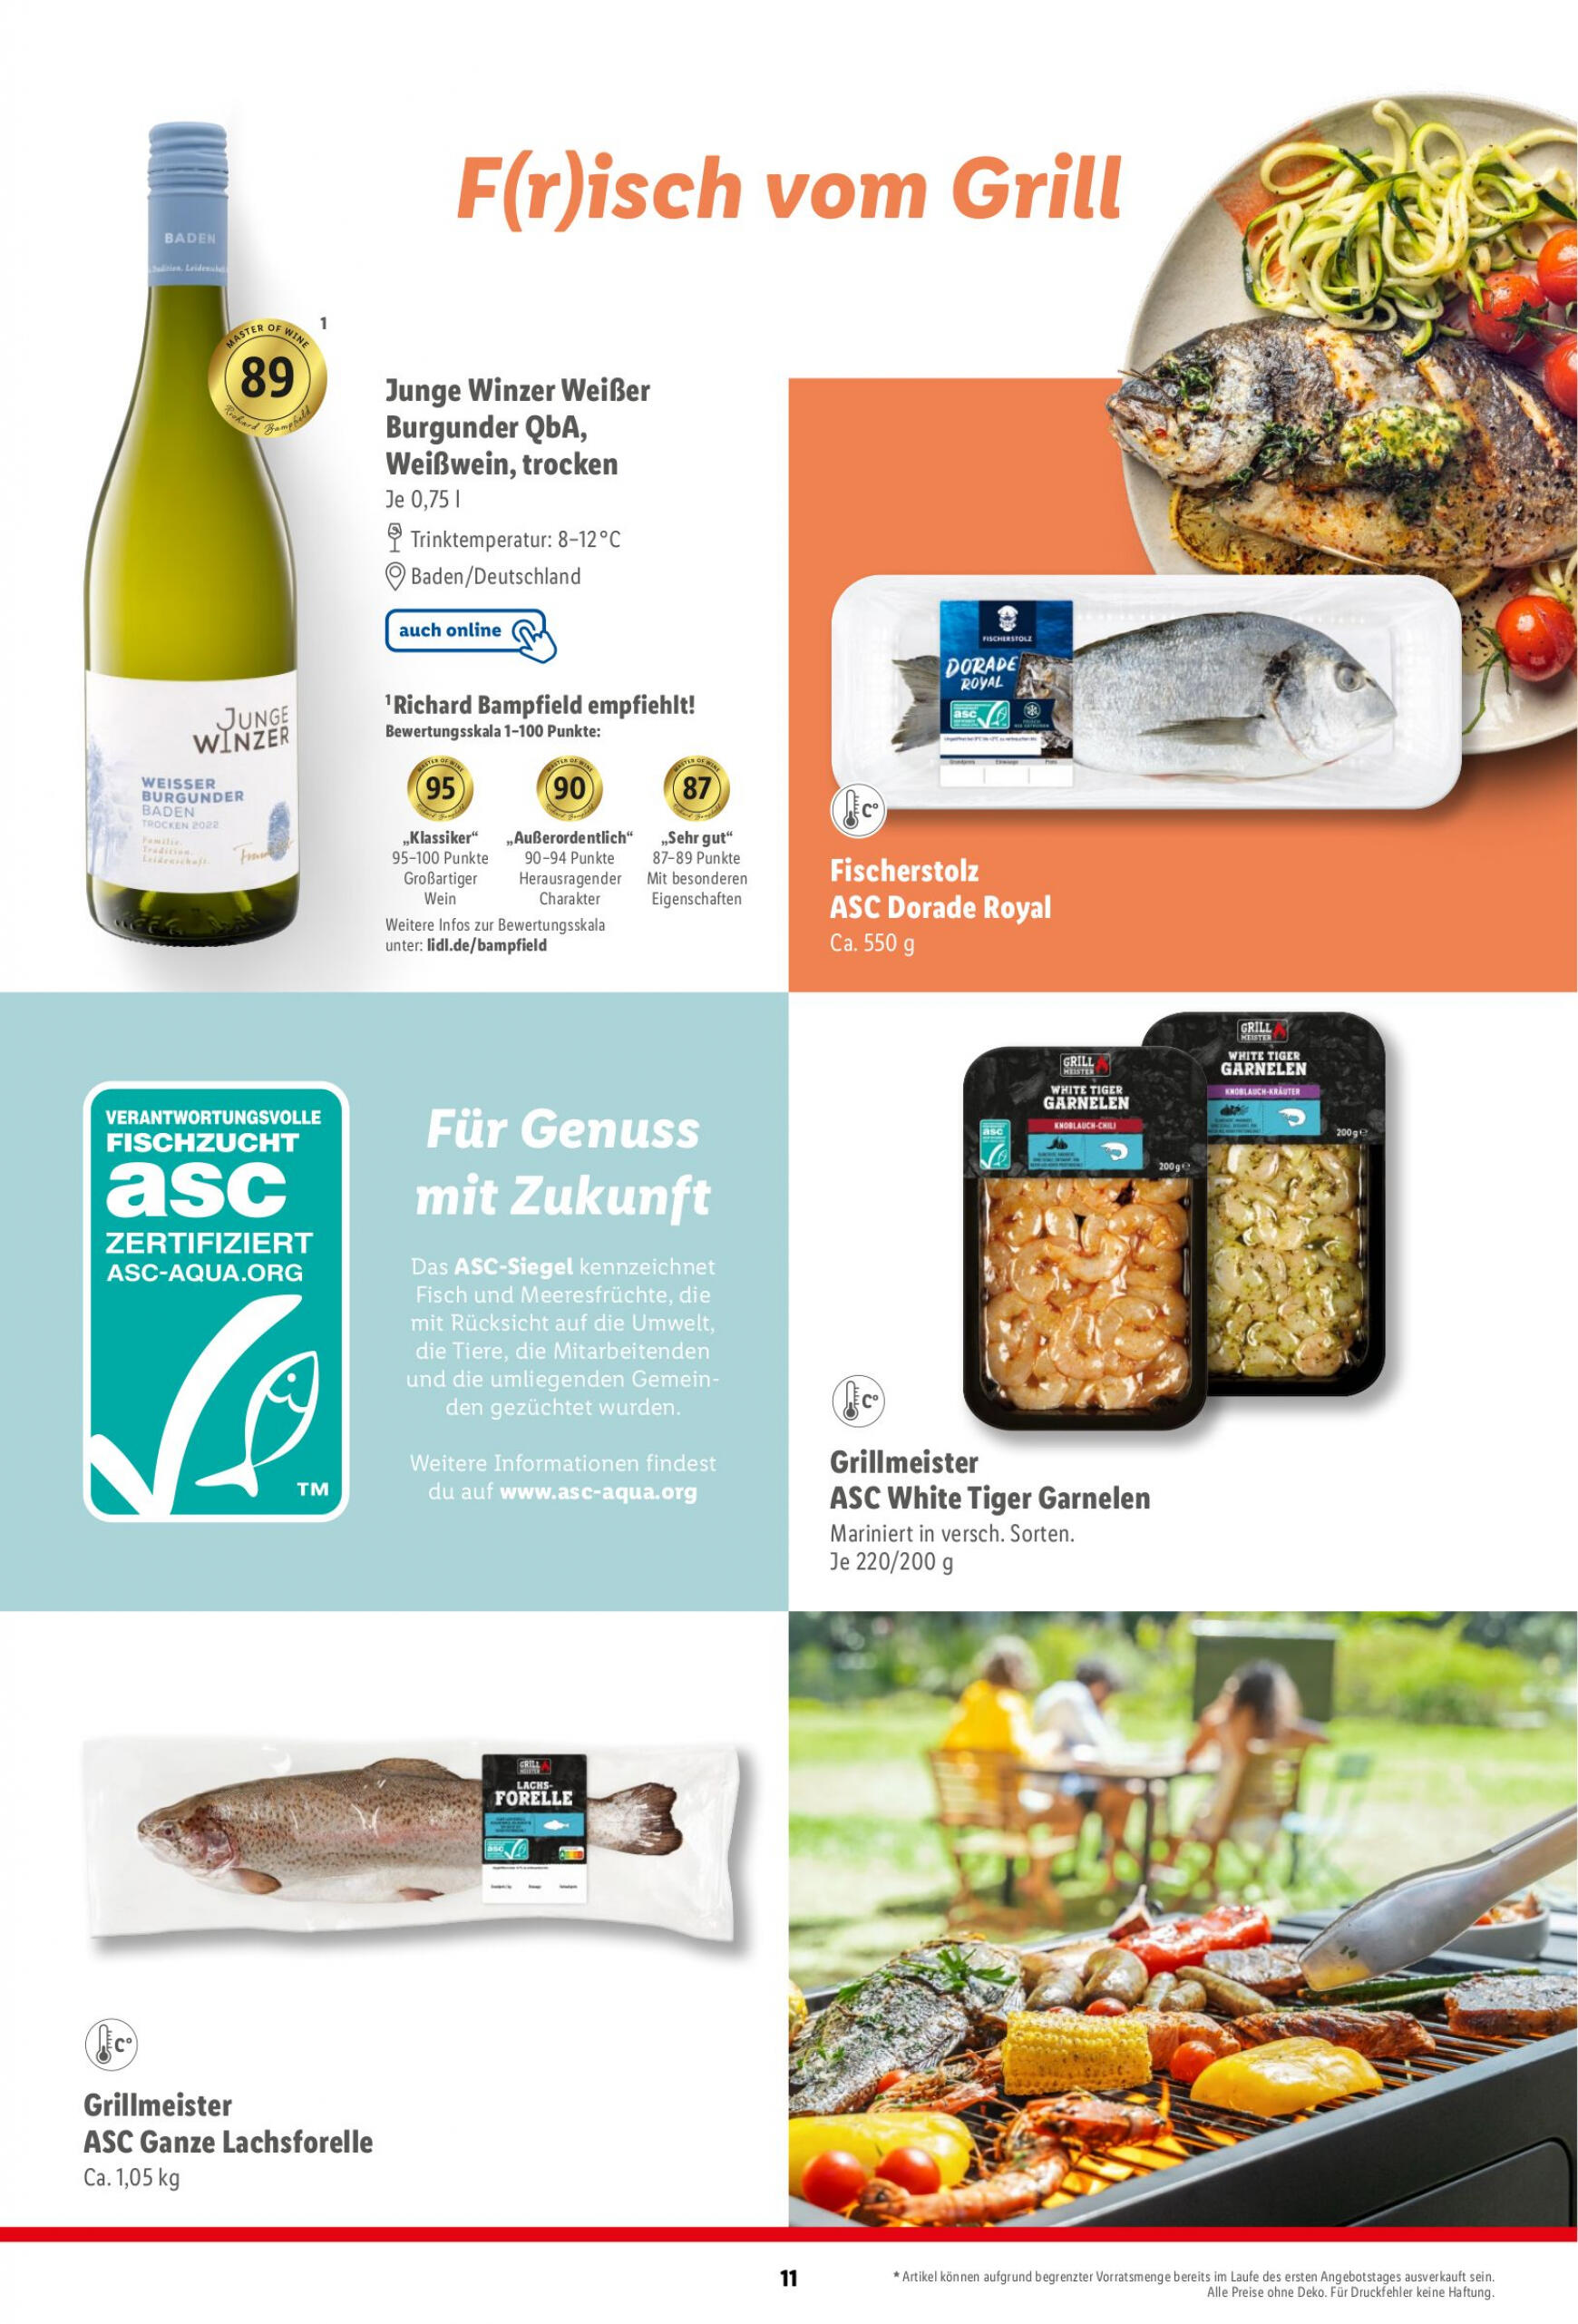 lidl - Flyer Lidl - Grillmagazin aktuell 22.04. - 30.06. - page: 11